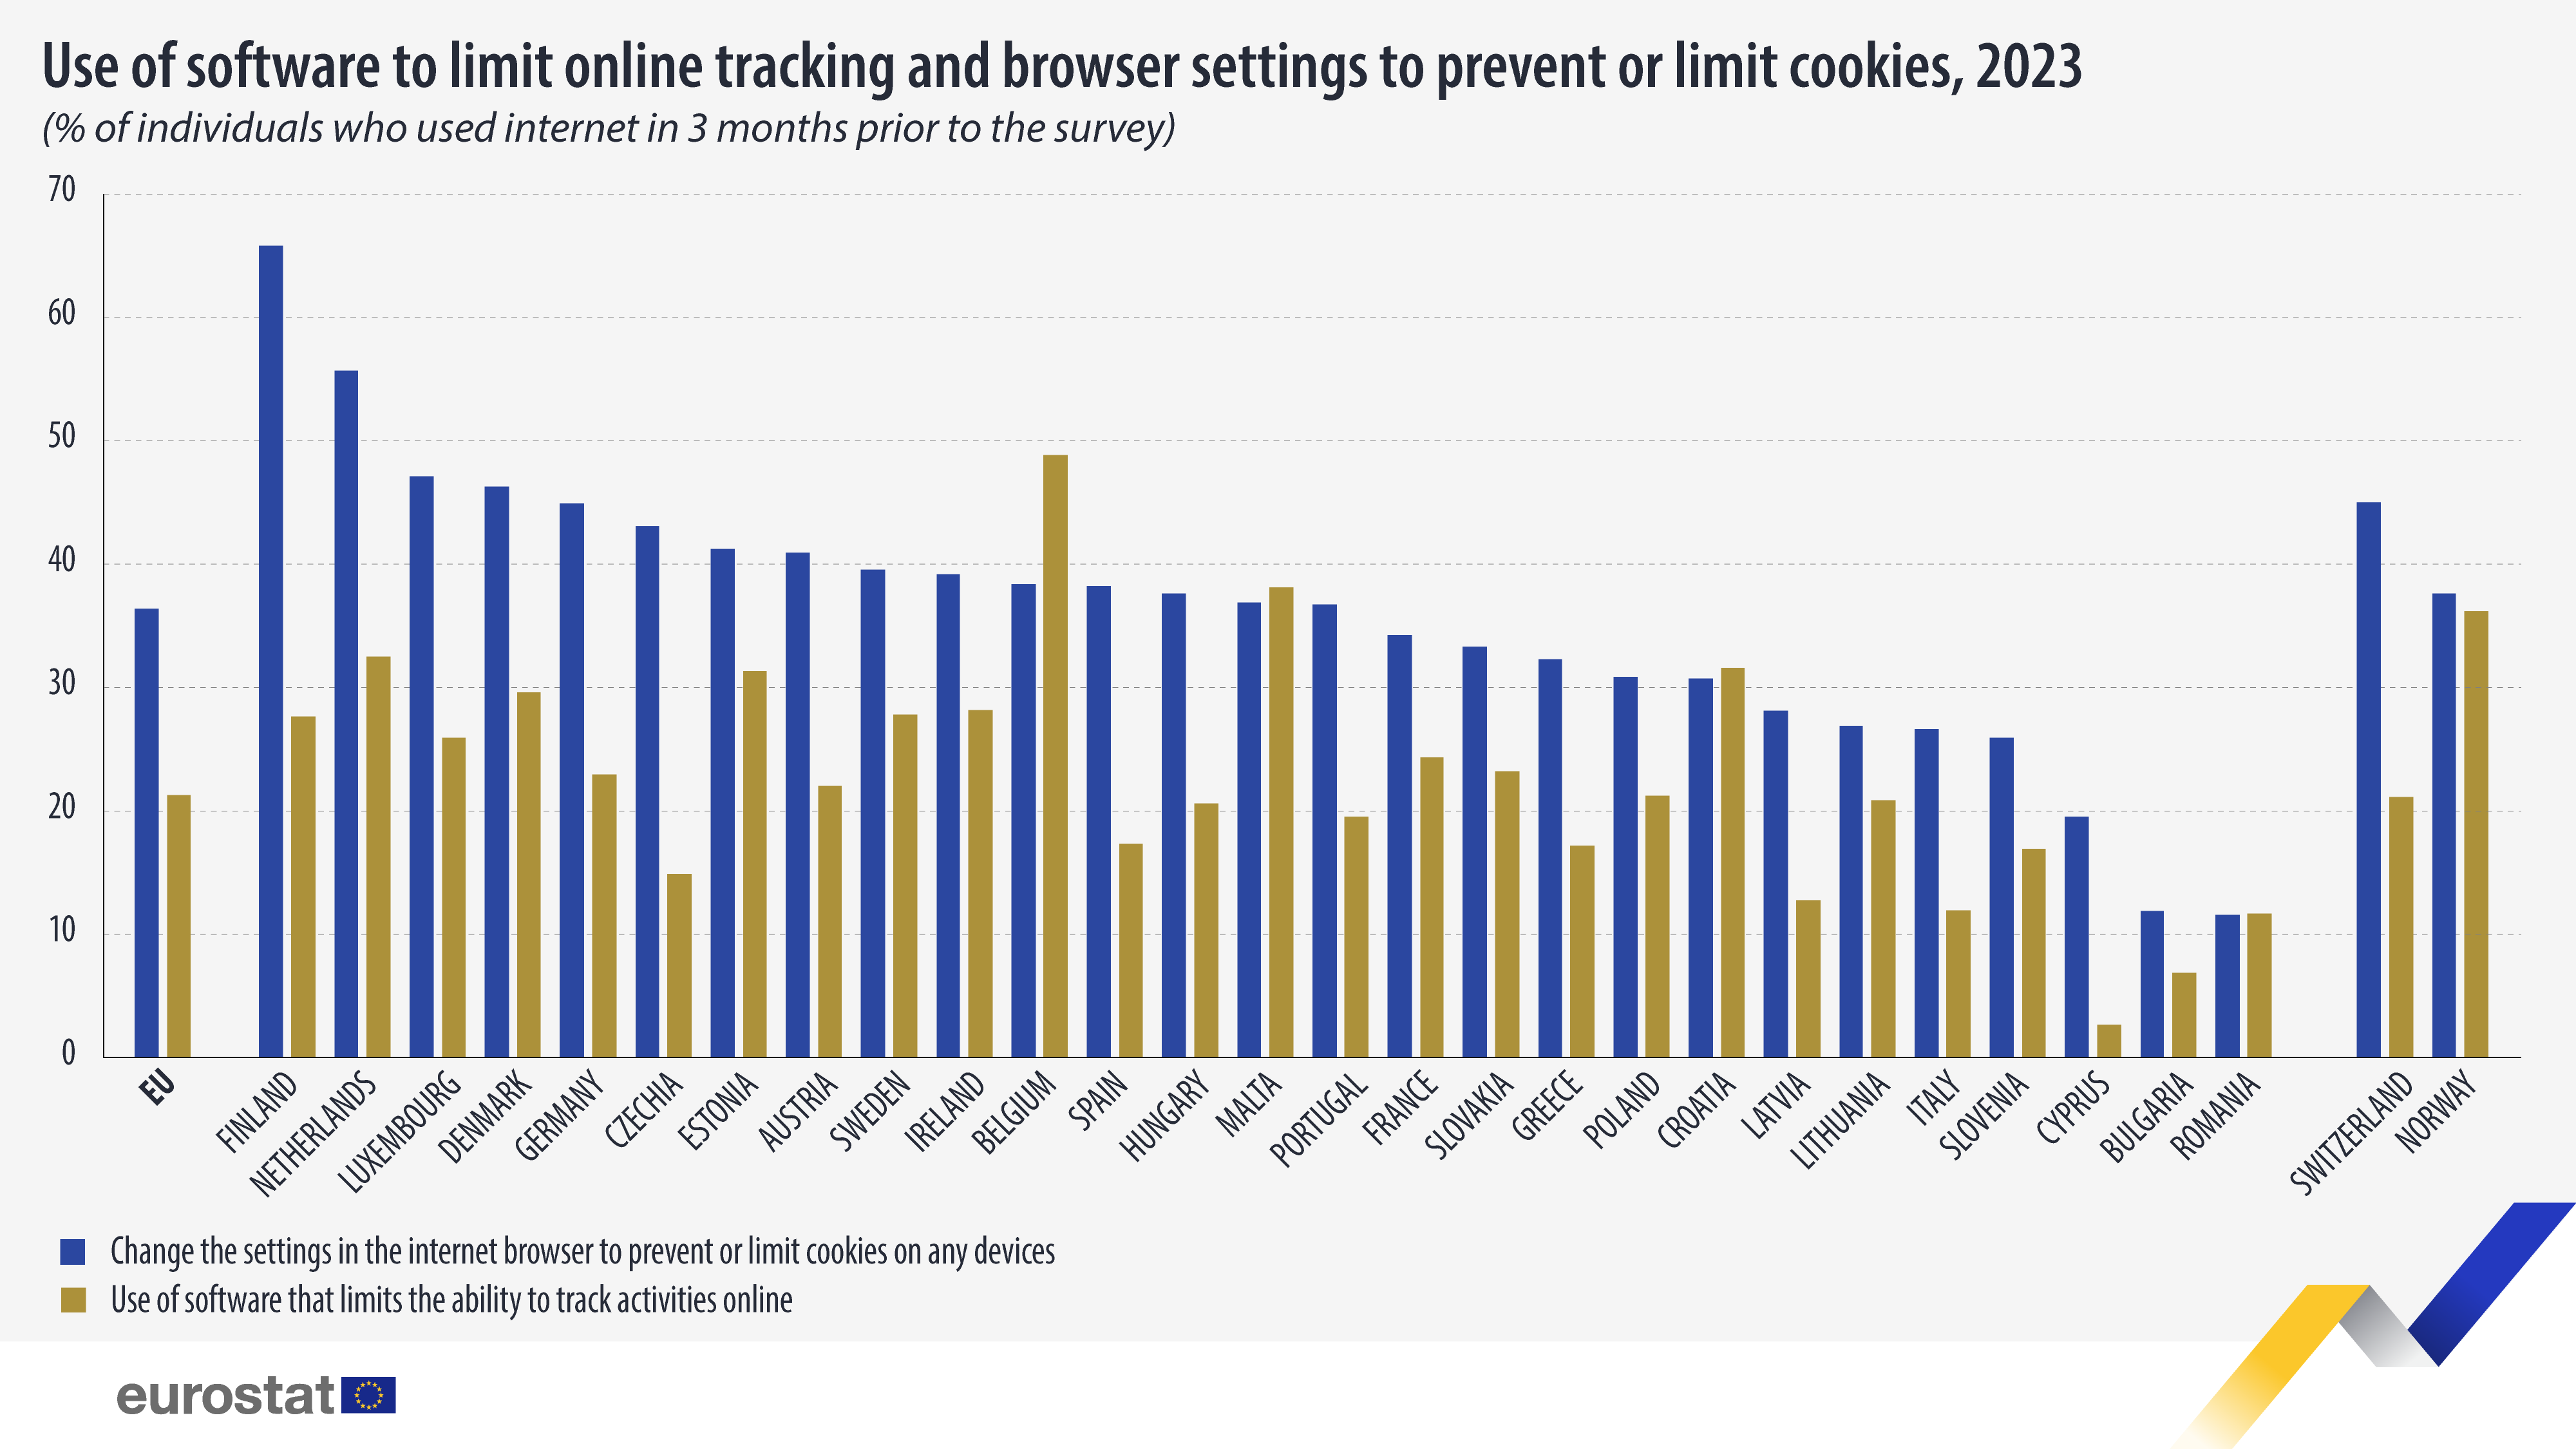 Use of software to limit online tracking and browser settings to prevent or limit cookies, % of individuals who used internet in 3 months prior to the survey, 2023. Bar chart. See link to full dataset below.